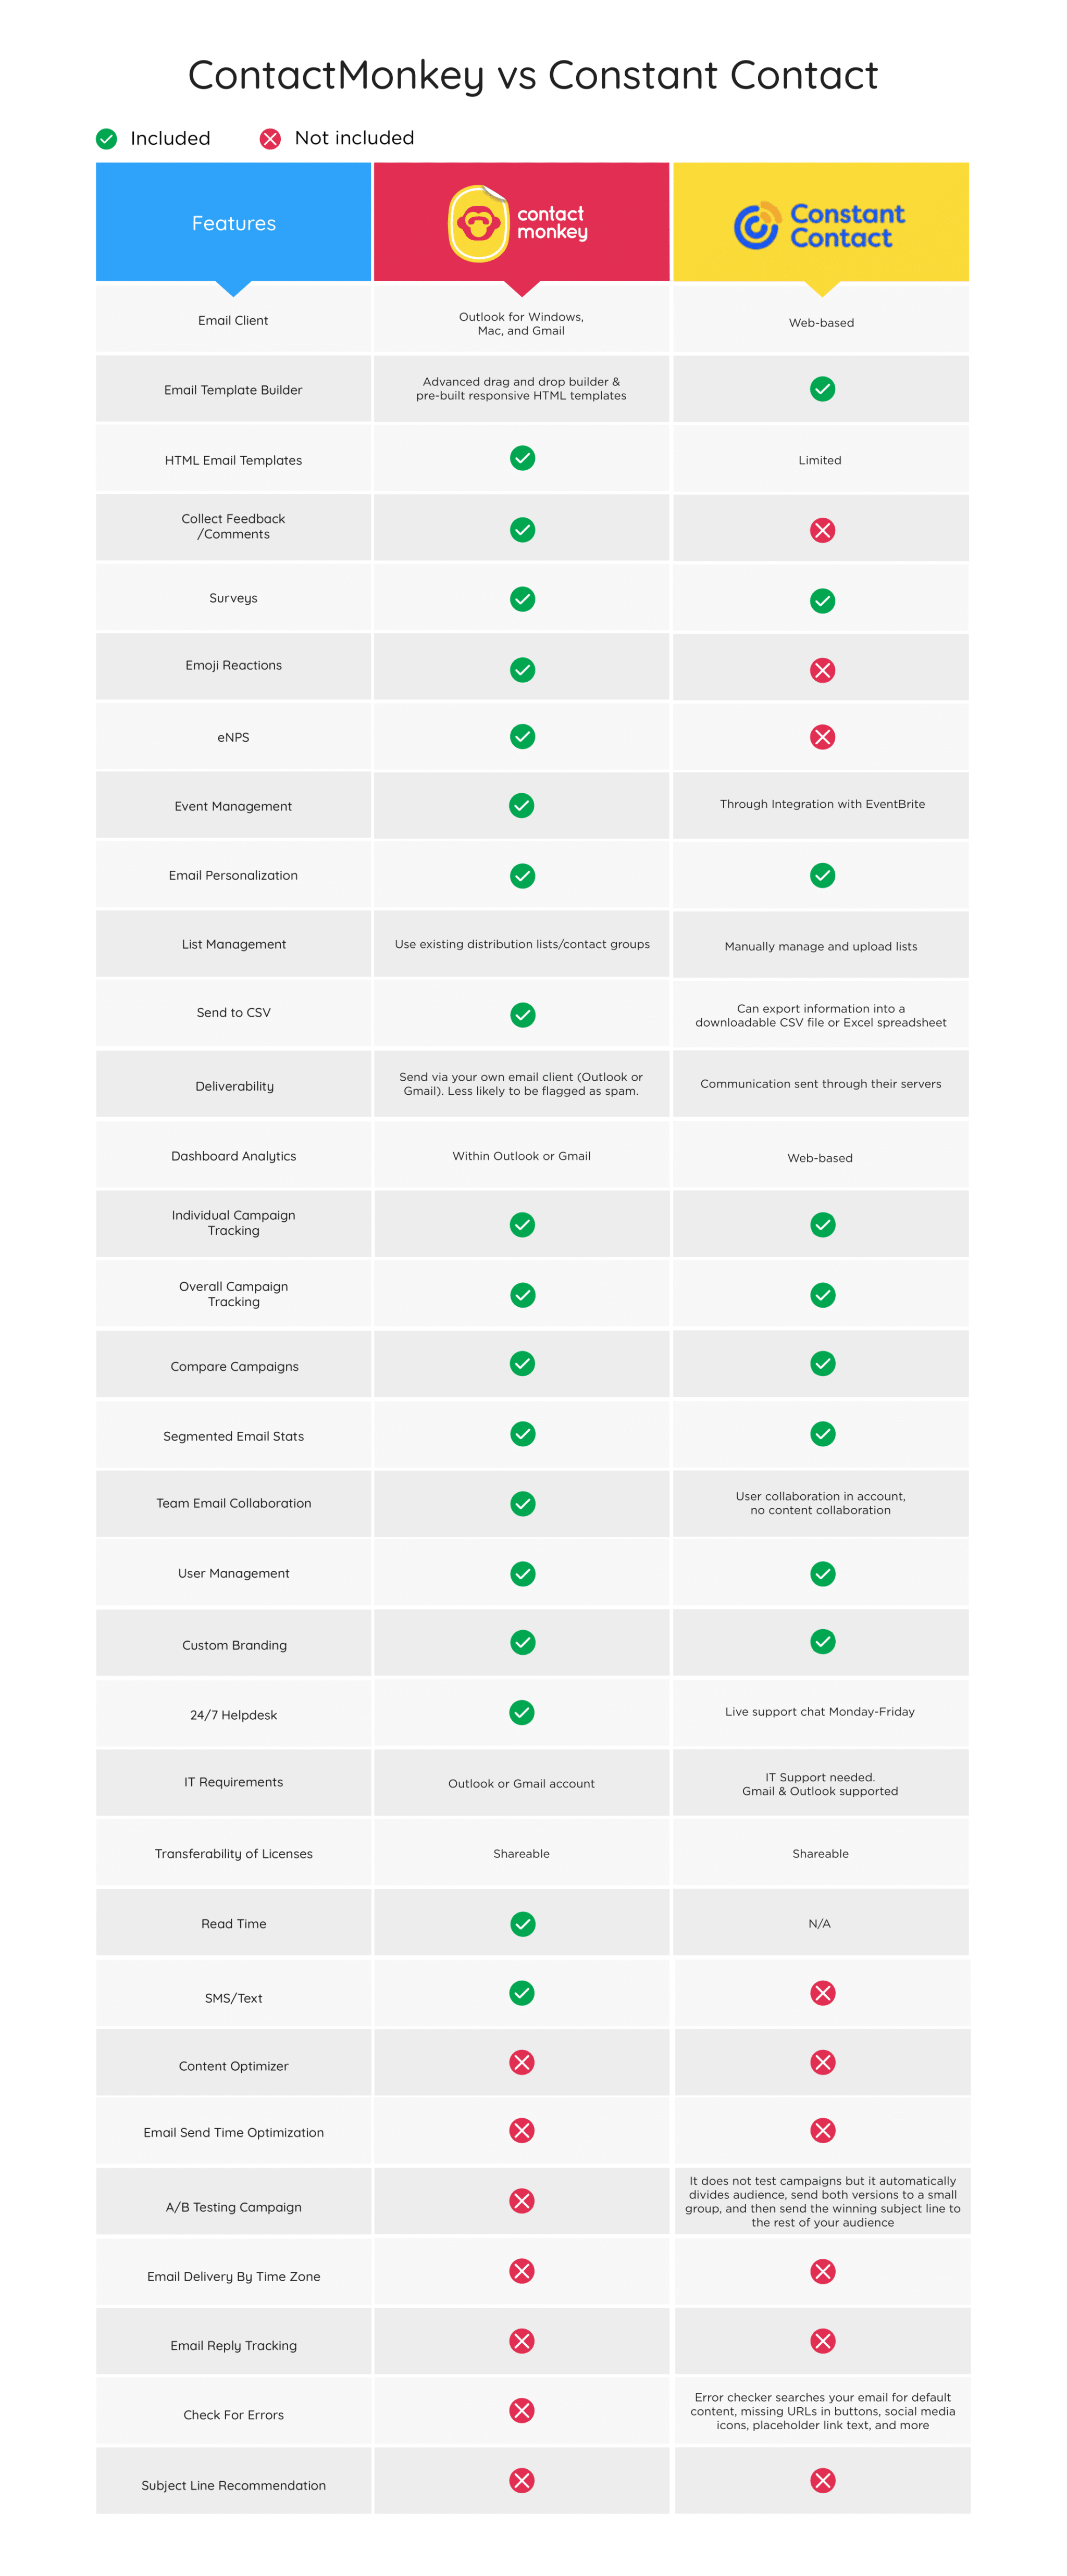 Image of comparison chart between ContactMonkey and Constant Contact.